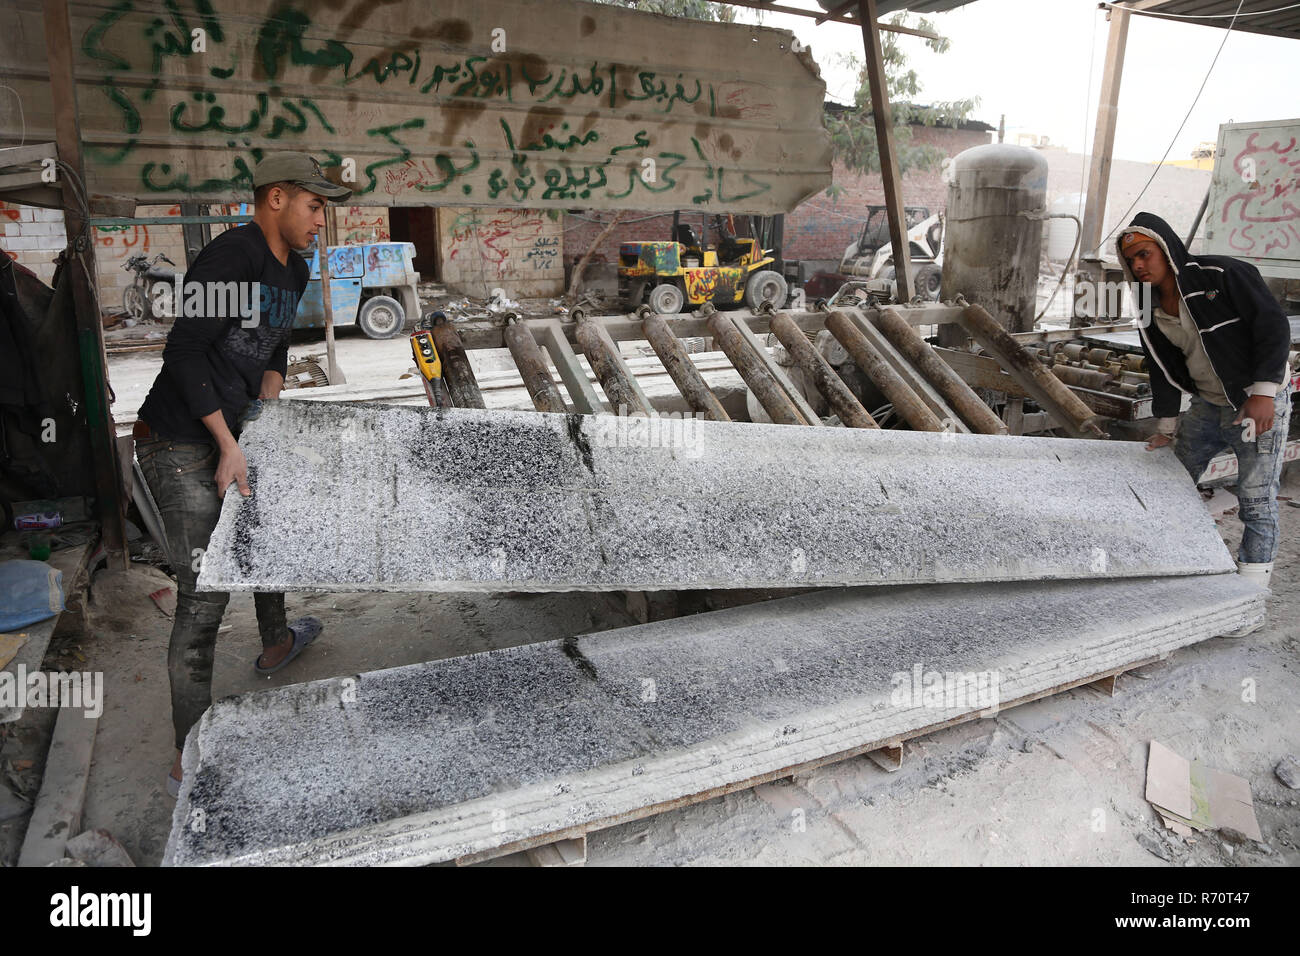 Cairo, Egypt. 6th Dec, 2018. People work in a marble and granite factory in Cairo, Egypt, on Dec. 6, 2018. In Shaq al-Thu'ban vast marble and granite industrial cluster near Egyptian capital Cairo's Maadi district, about 40 Chinese and Egyptian cooperative granite factories and 30 marble factories have significantly contributed to boosting the industry in the most populous Arab country. Credit: Ahmed Gomaa/Xinhua/Alamy Live News Stock Photo